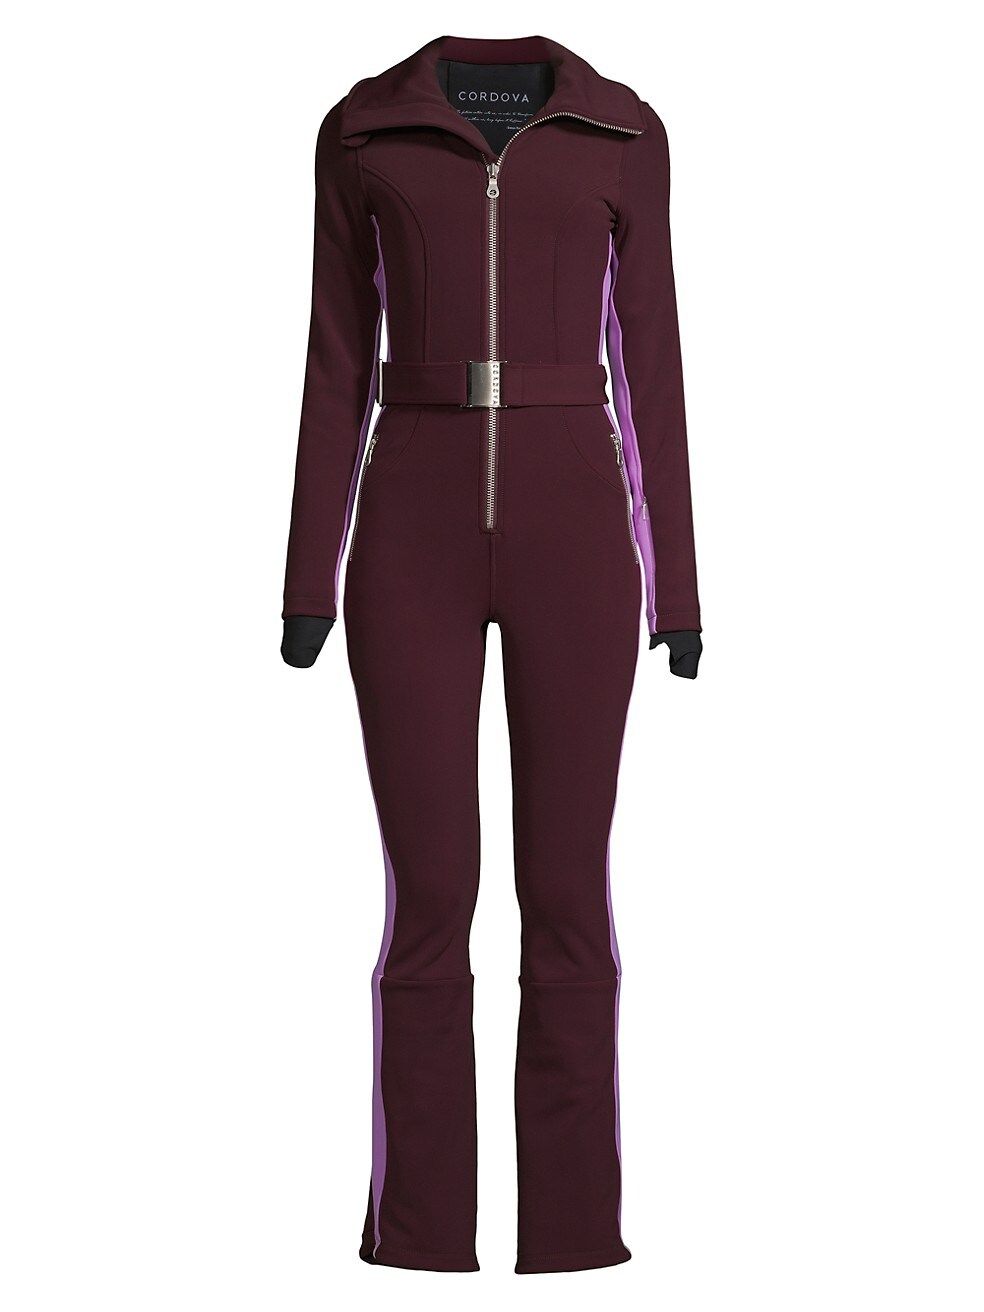 Cordova Belted Boot-Cut Ski Suit | Saks Fifth Avenue